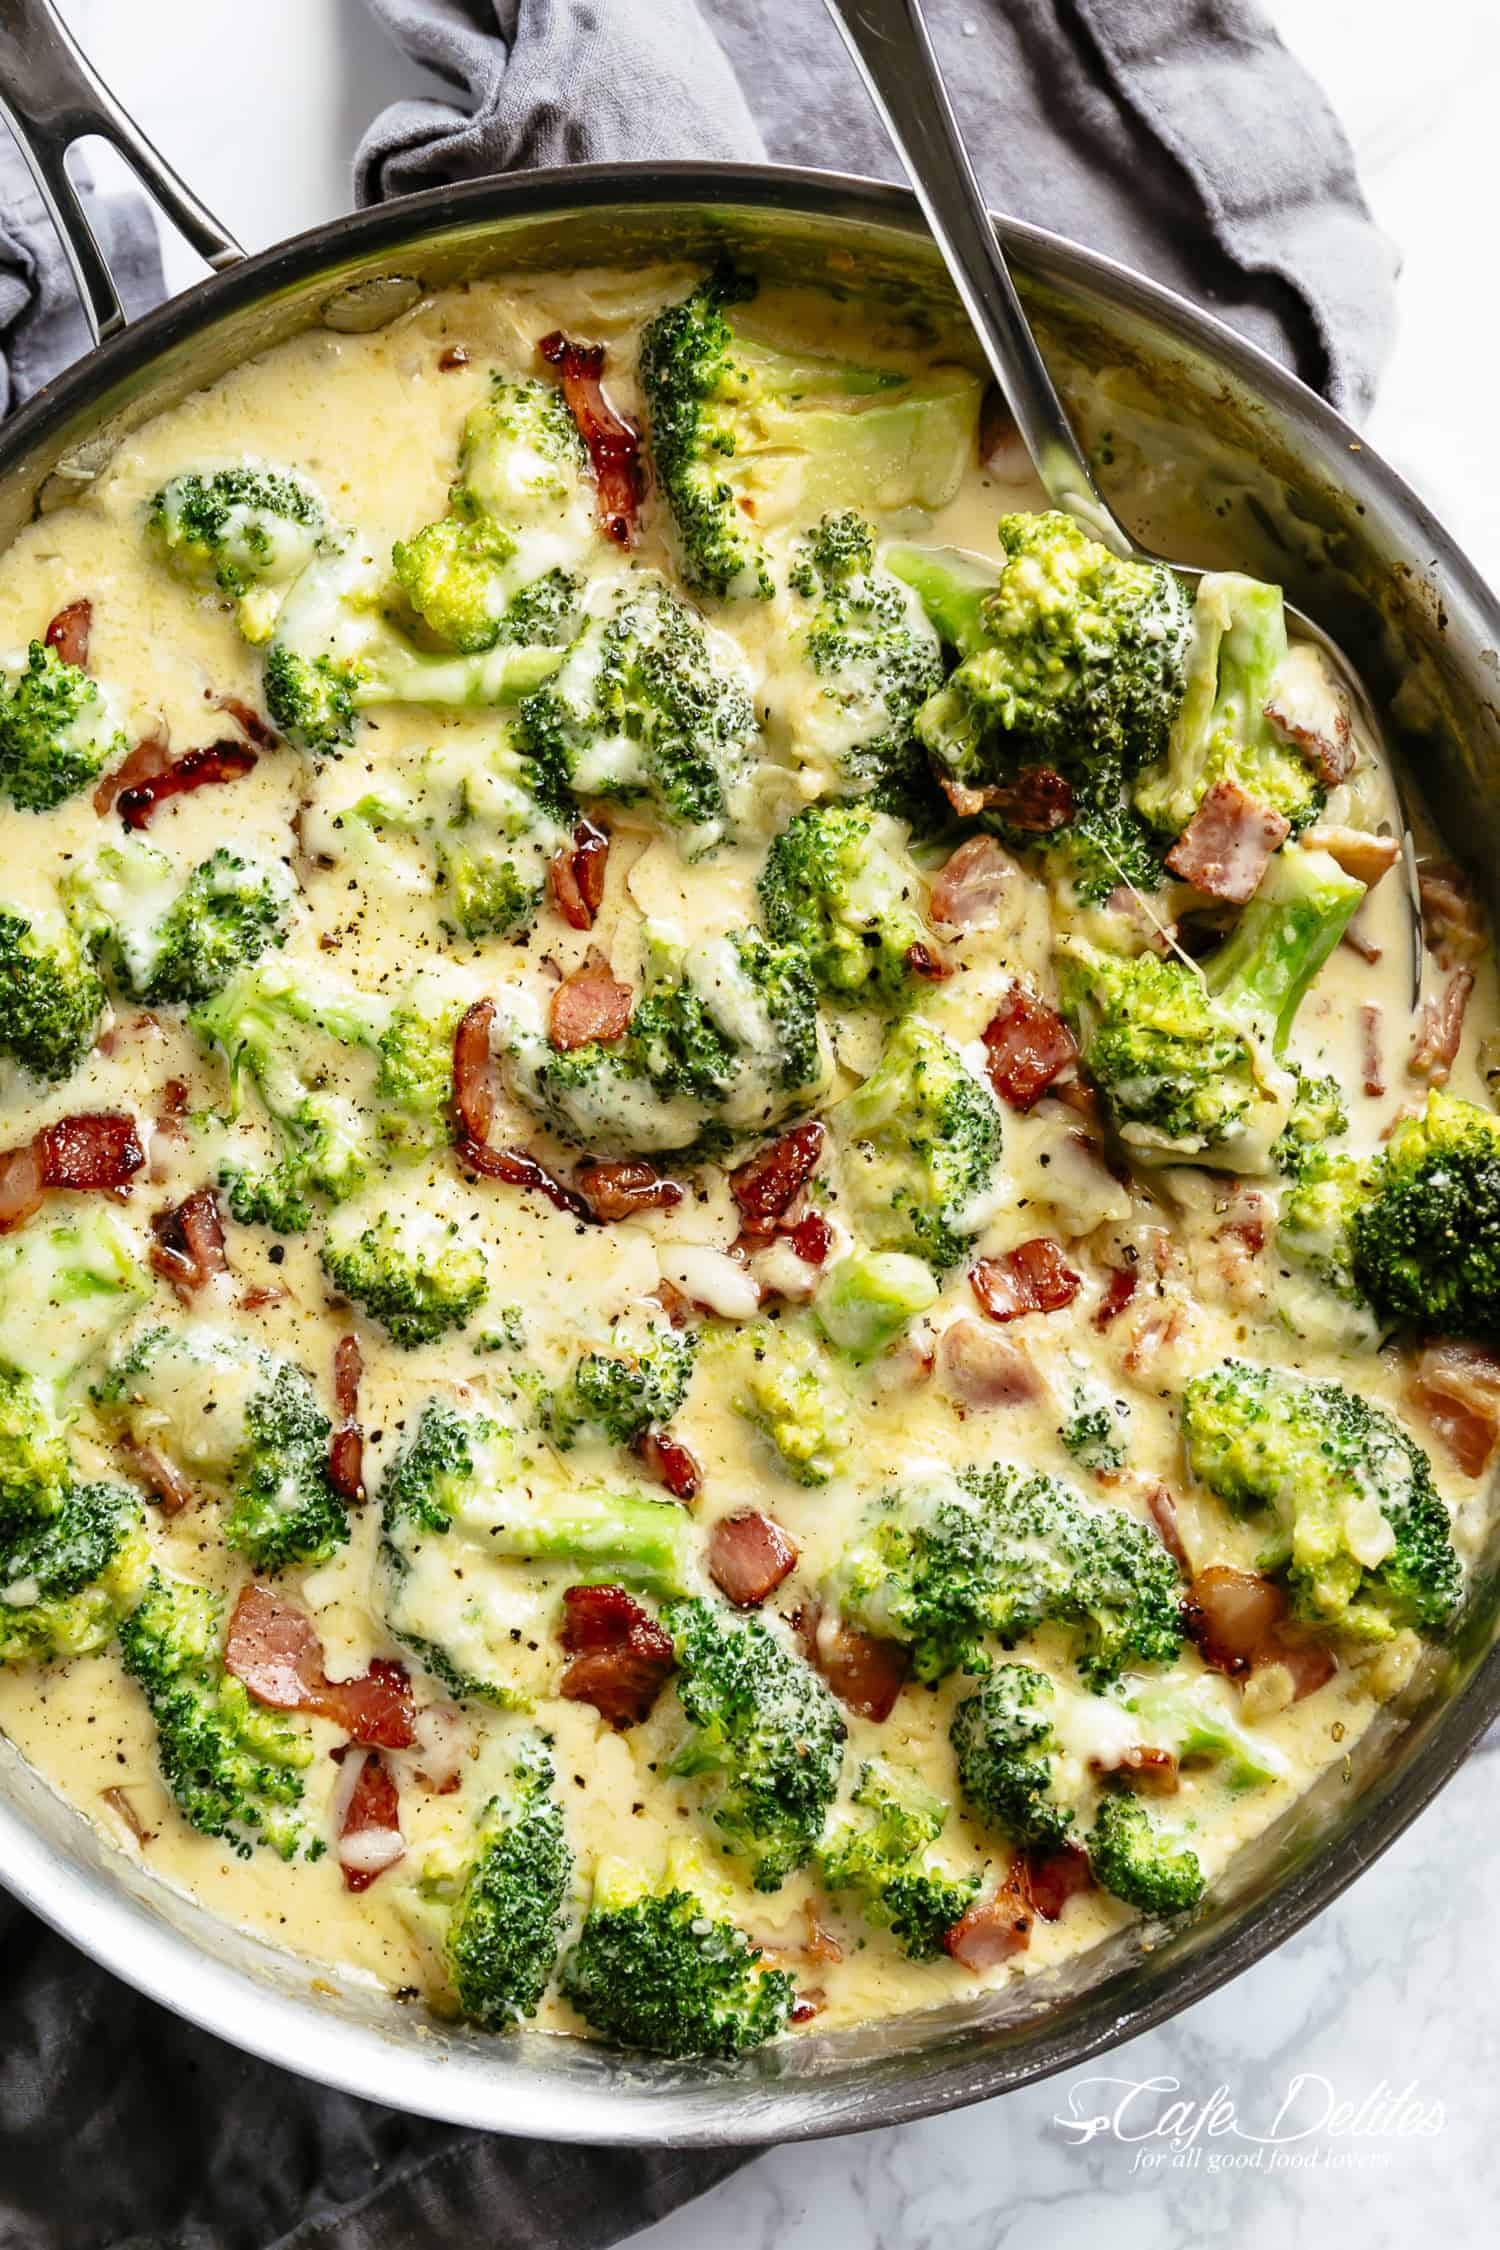 Broccoli Casserole baked in a cheesy creamy parmesan garlic sauce topped with bubbling mozzarella! Keto approved and low carb! | cafedelites.com